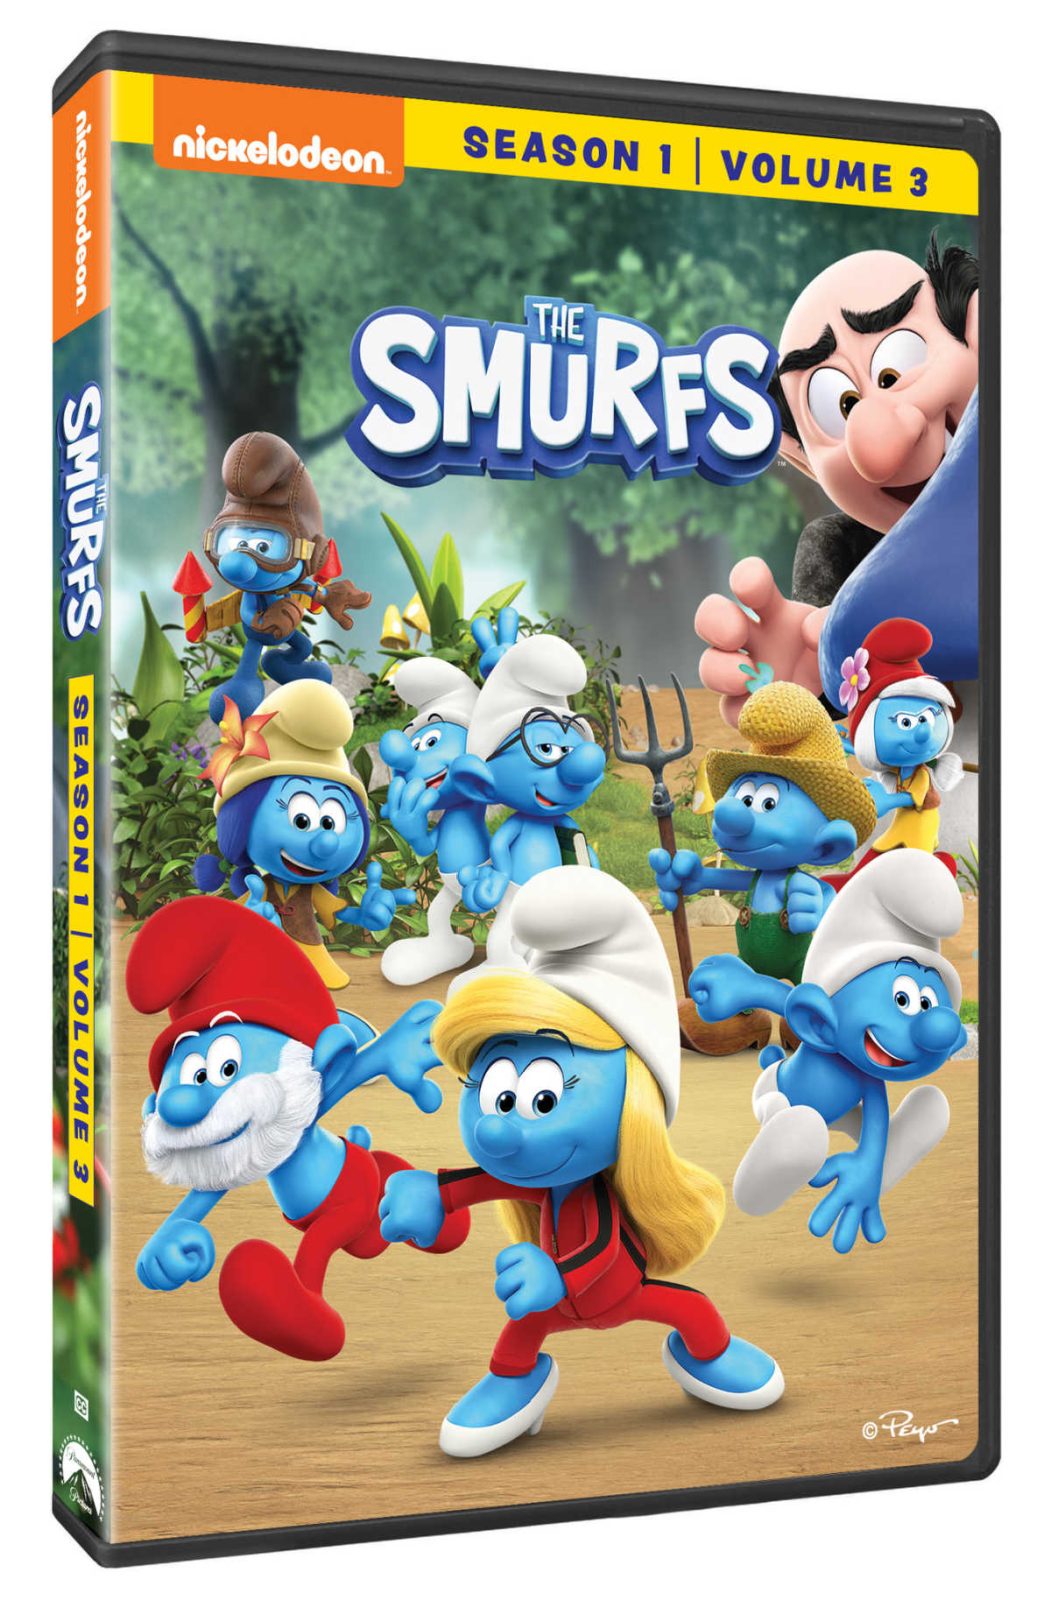 Kids will love the new The Smurfs Season 1 Volume 3 DVD, since it is filled with fun, entertainment and a whole lot of heart. 